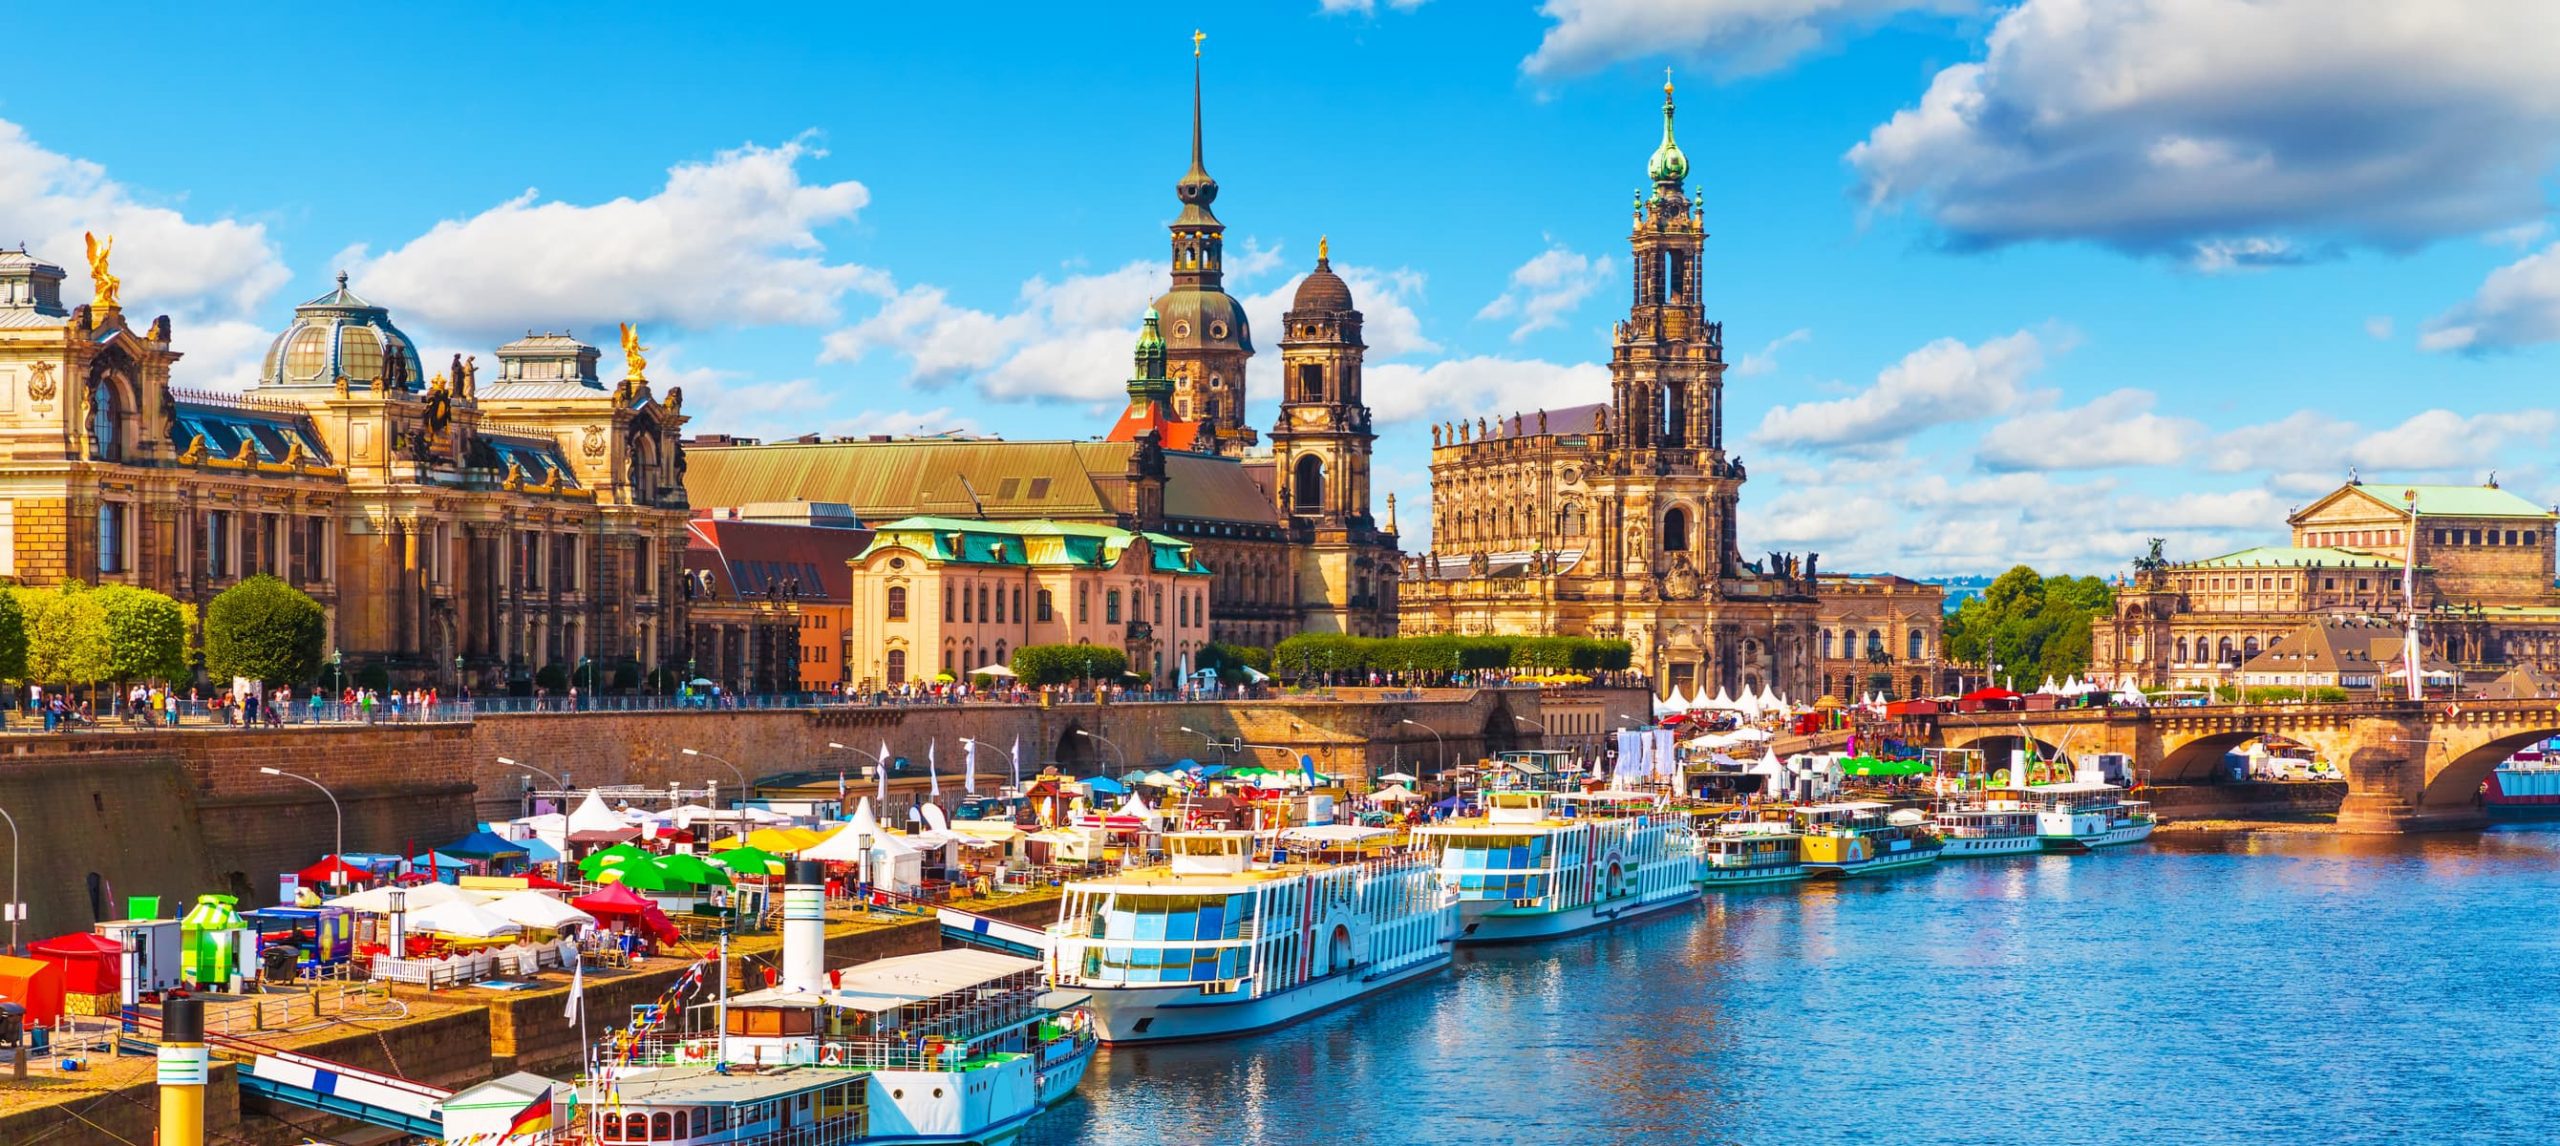 Dresden and the river Elbe